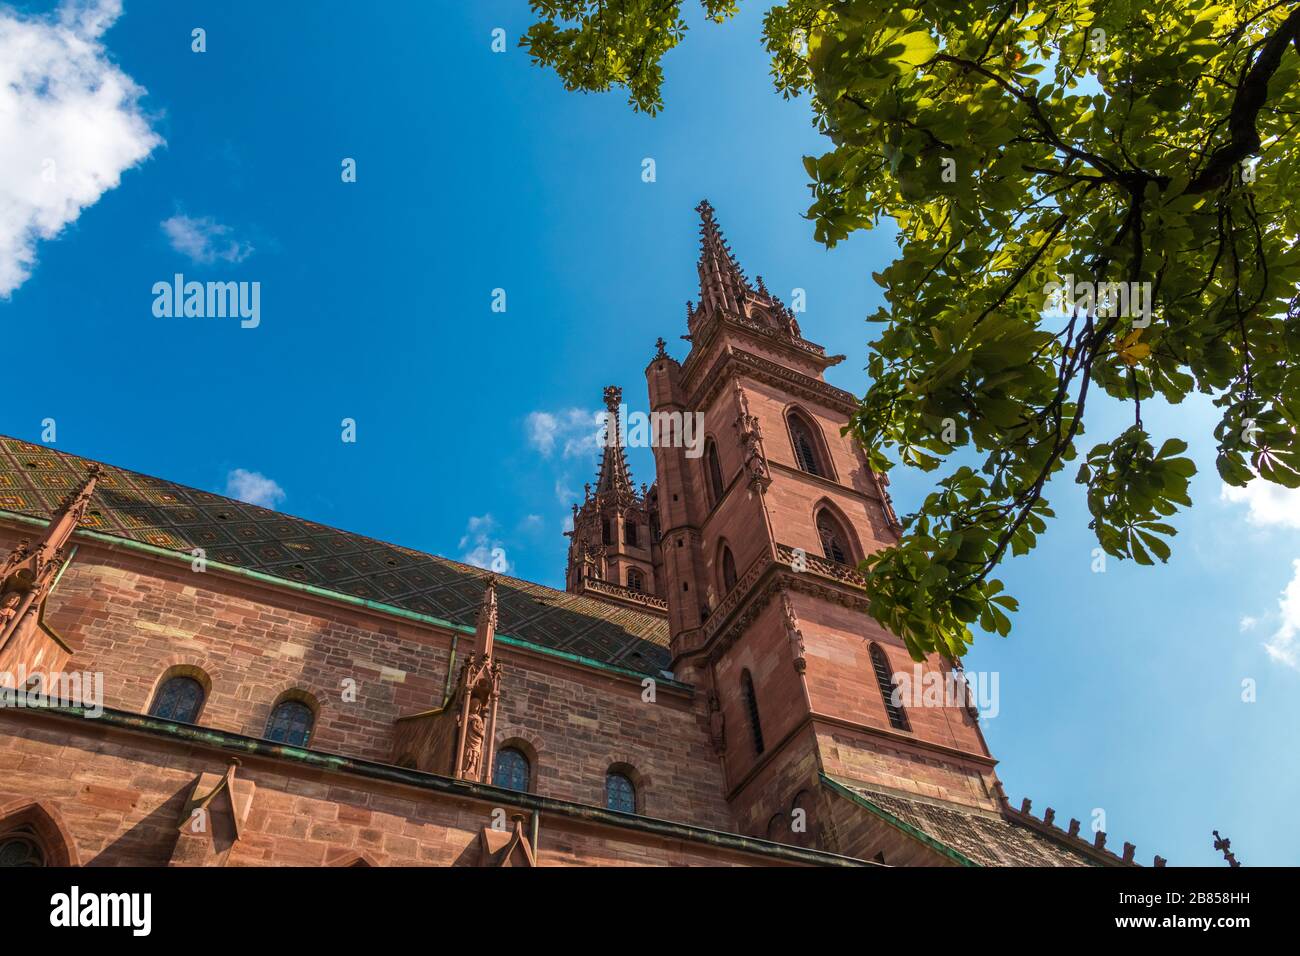 Great close-up view of the two towers and the main roof of the Basel Minster. The tower in front is called Georgsturm and the tower behind is called... Stock Photo